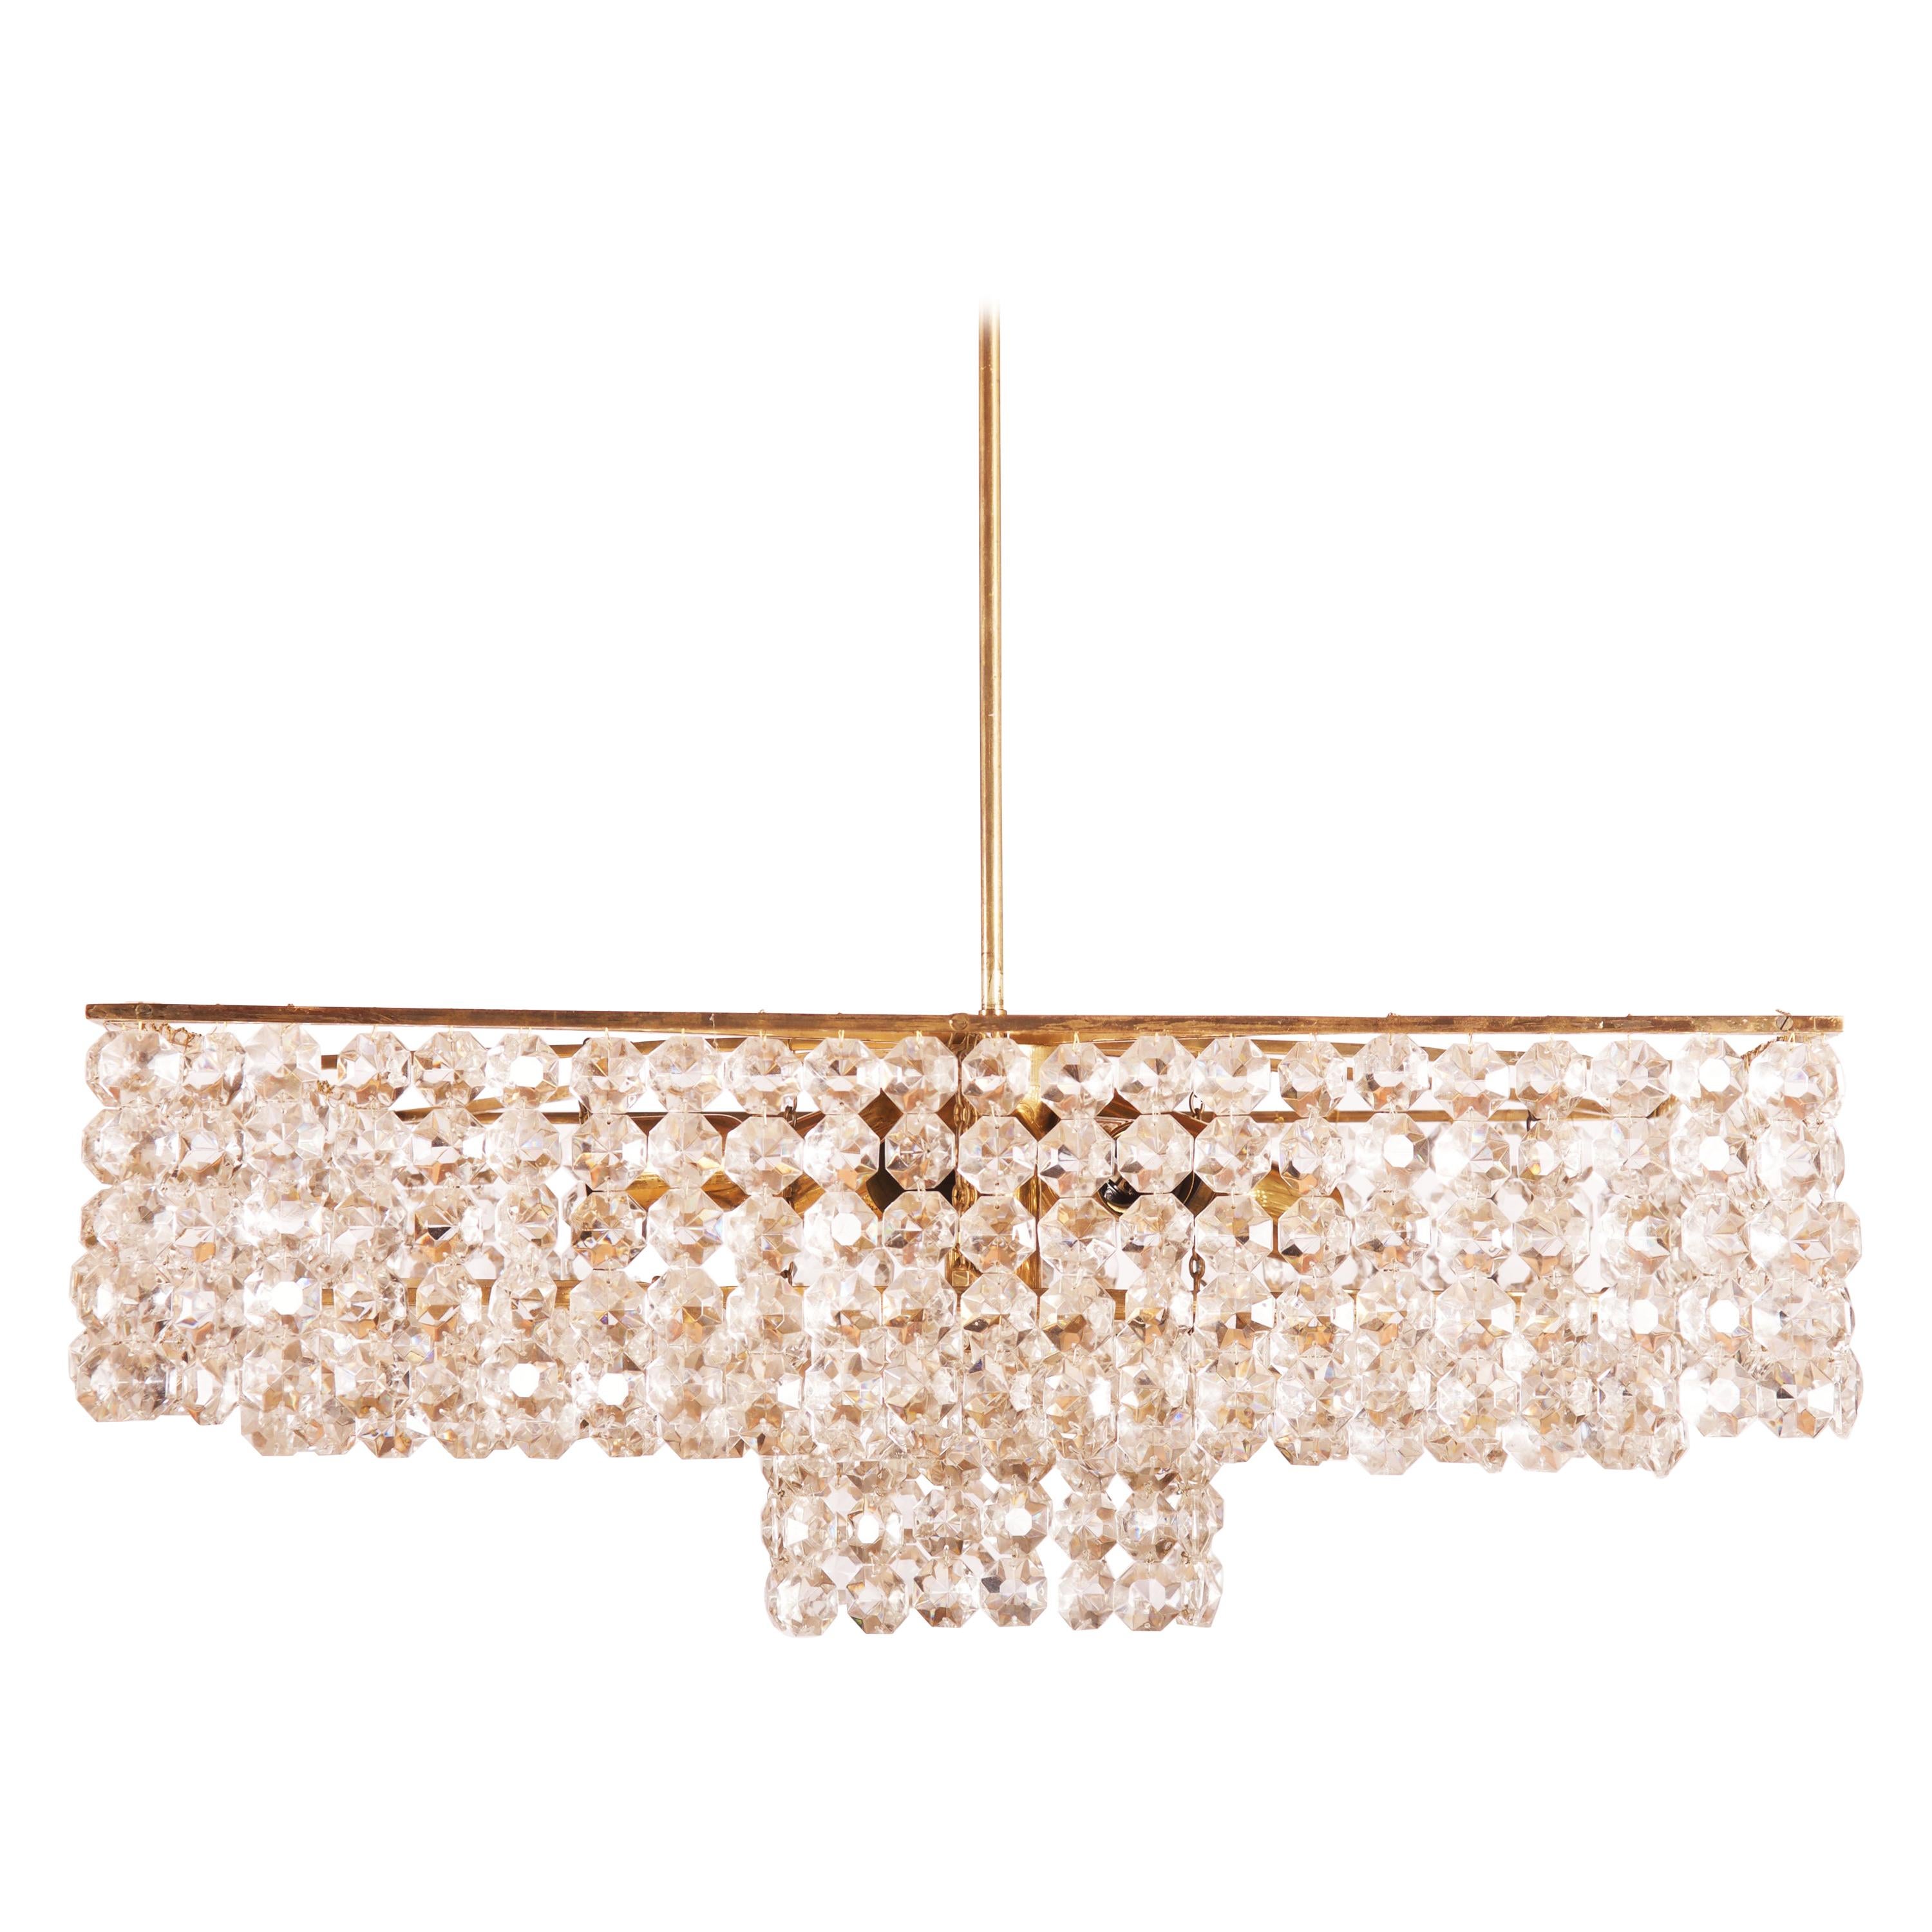 Midcentury Square Cut Crystal Chandelier